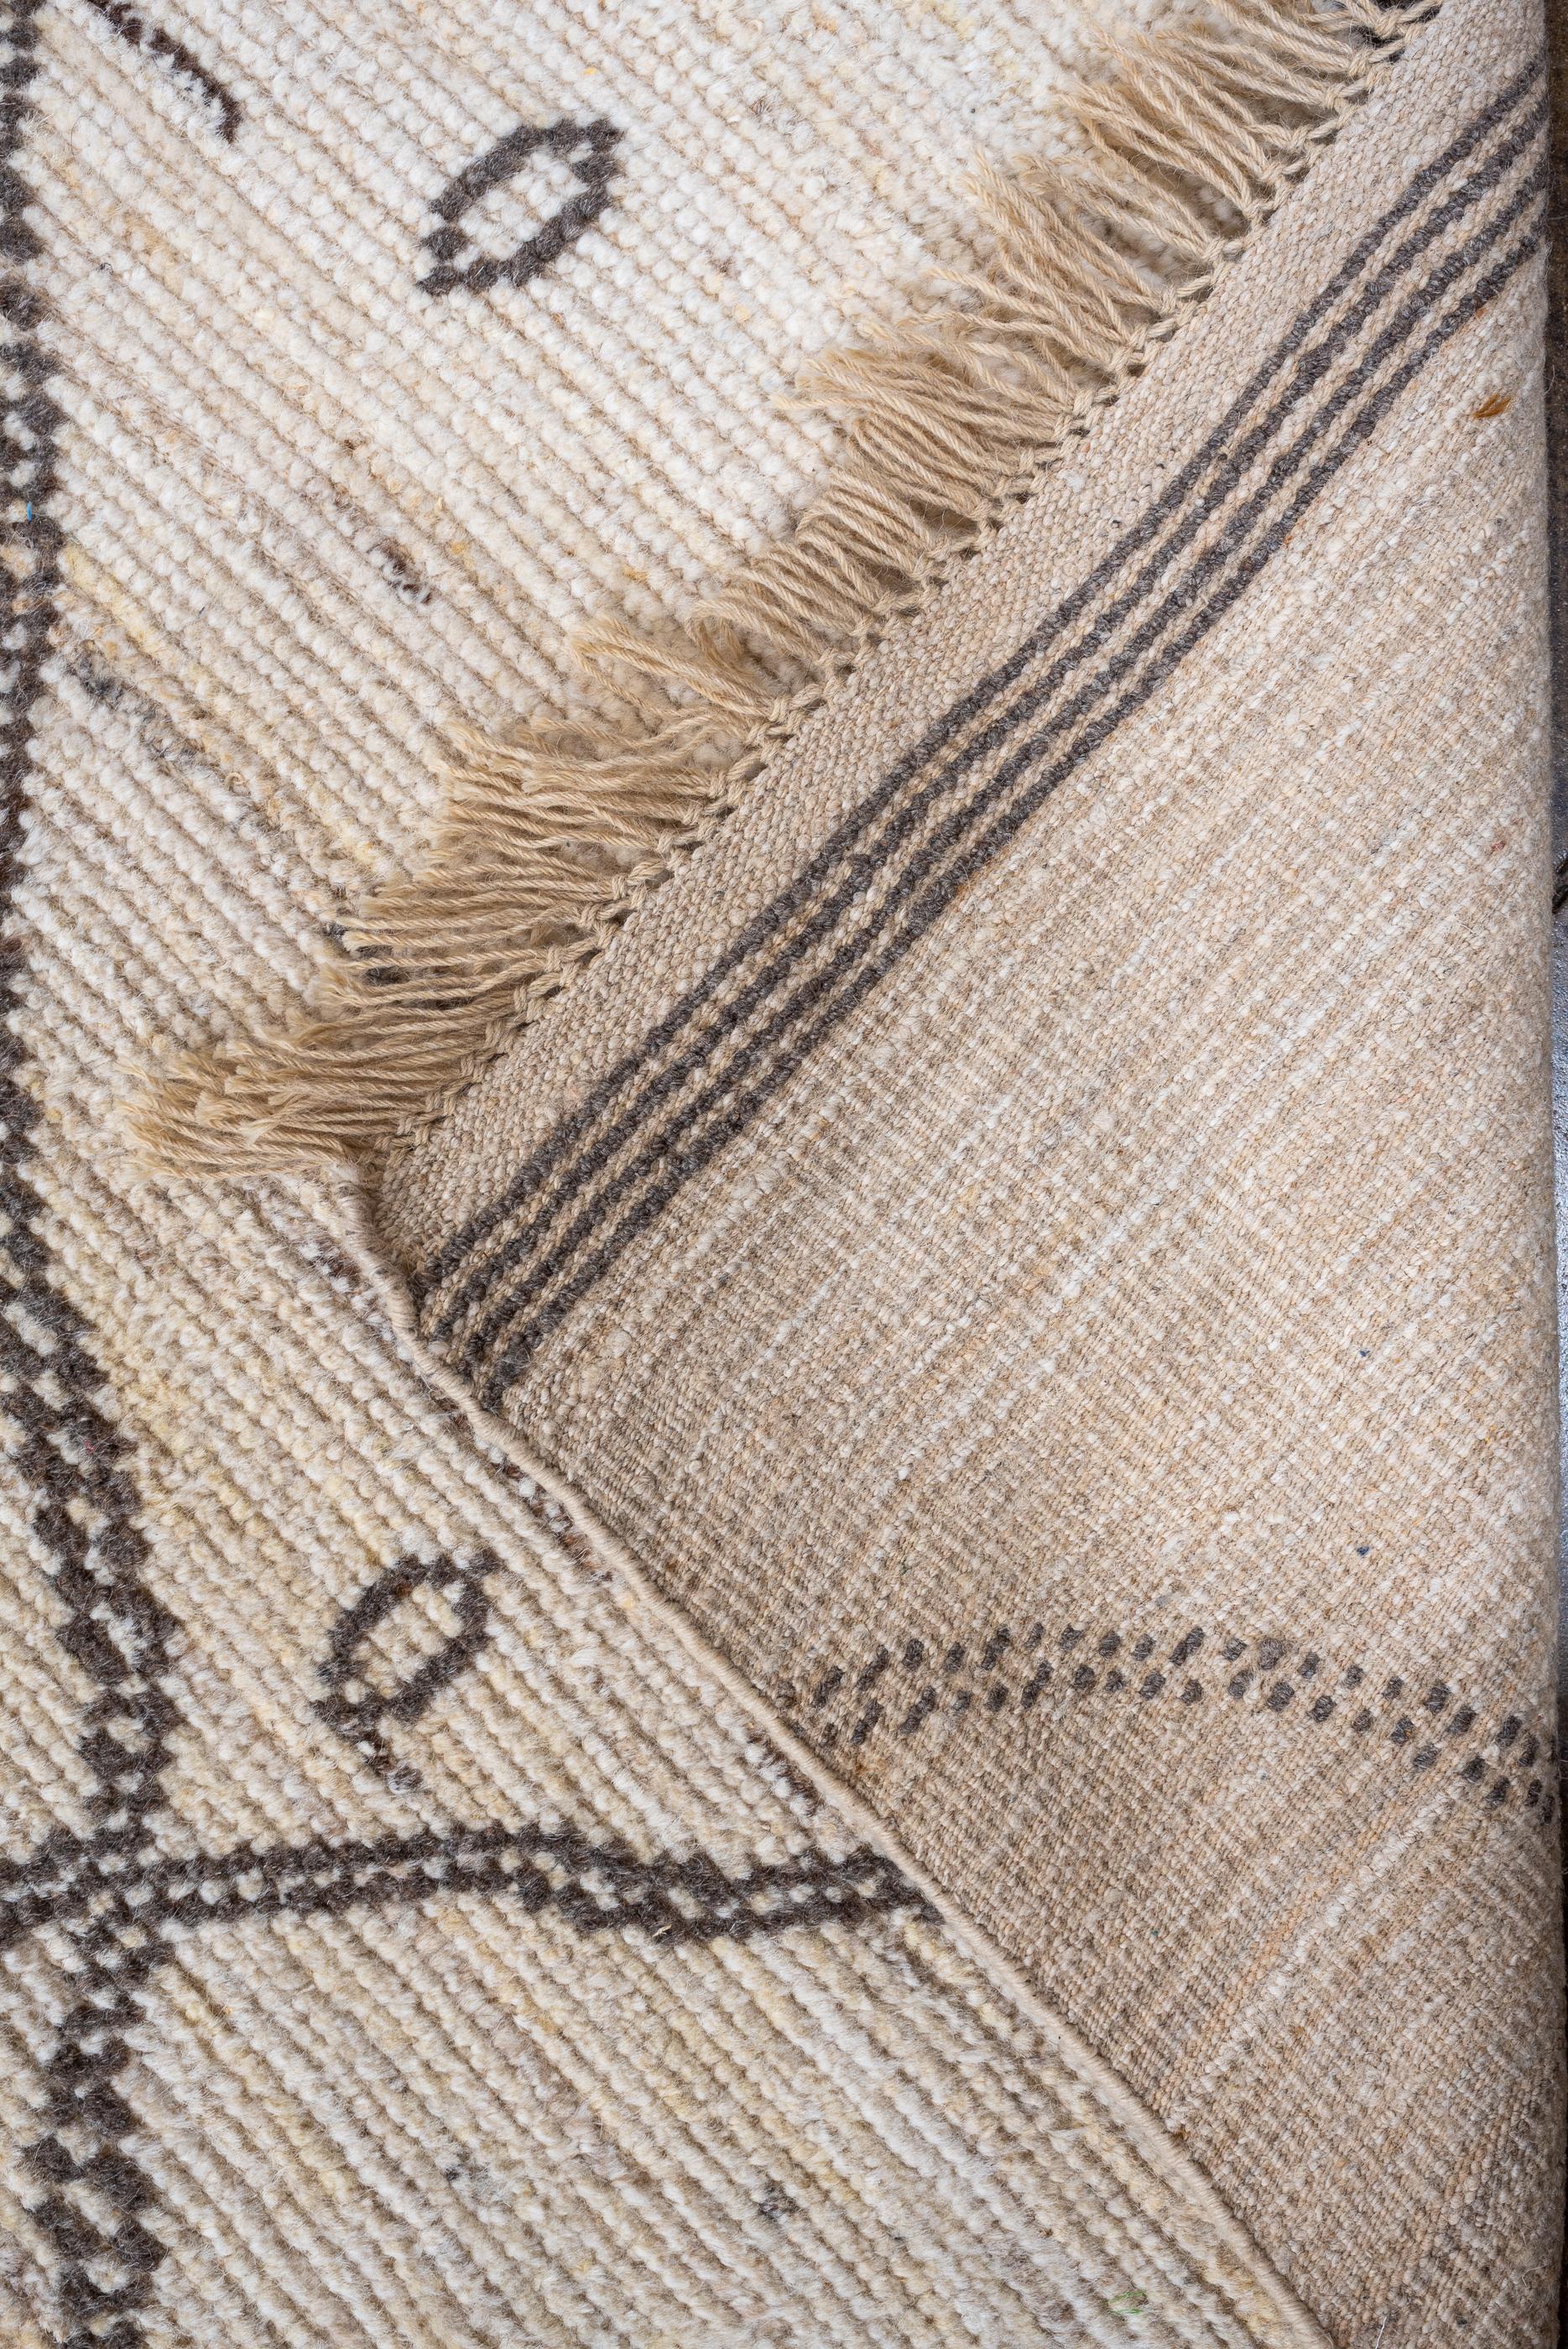 Contemporary New and Modern Tulu Design Rug For Sale